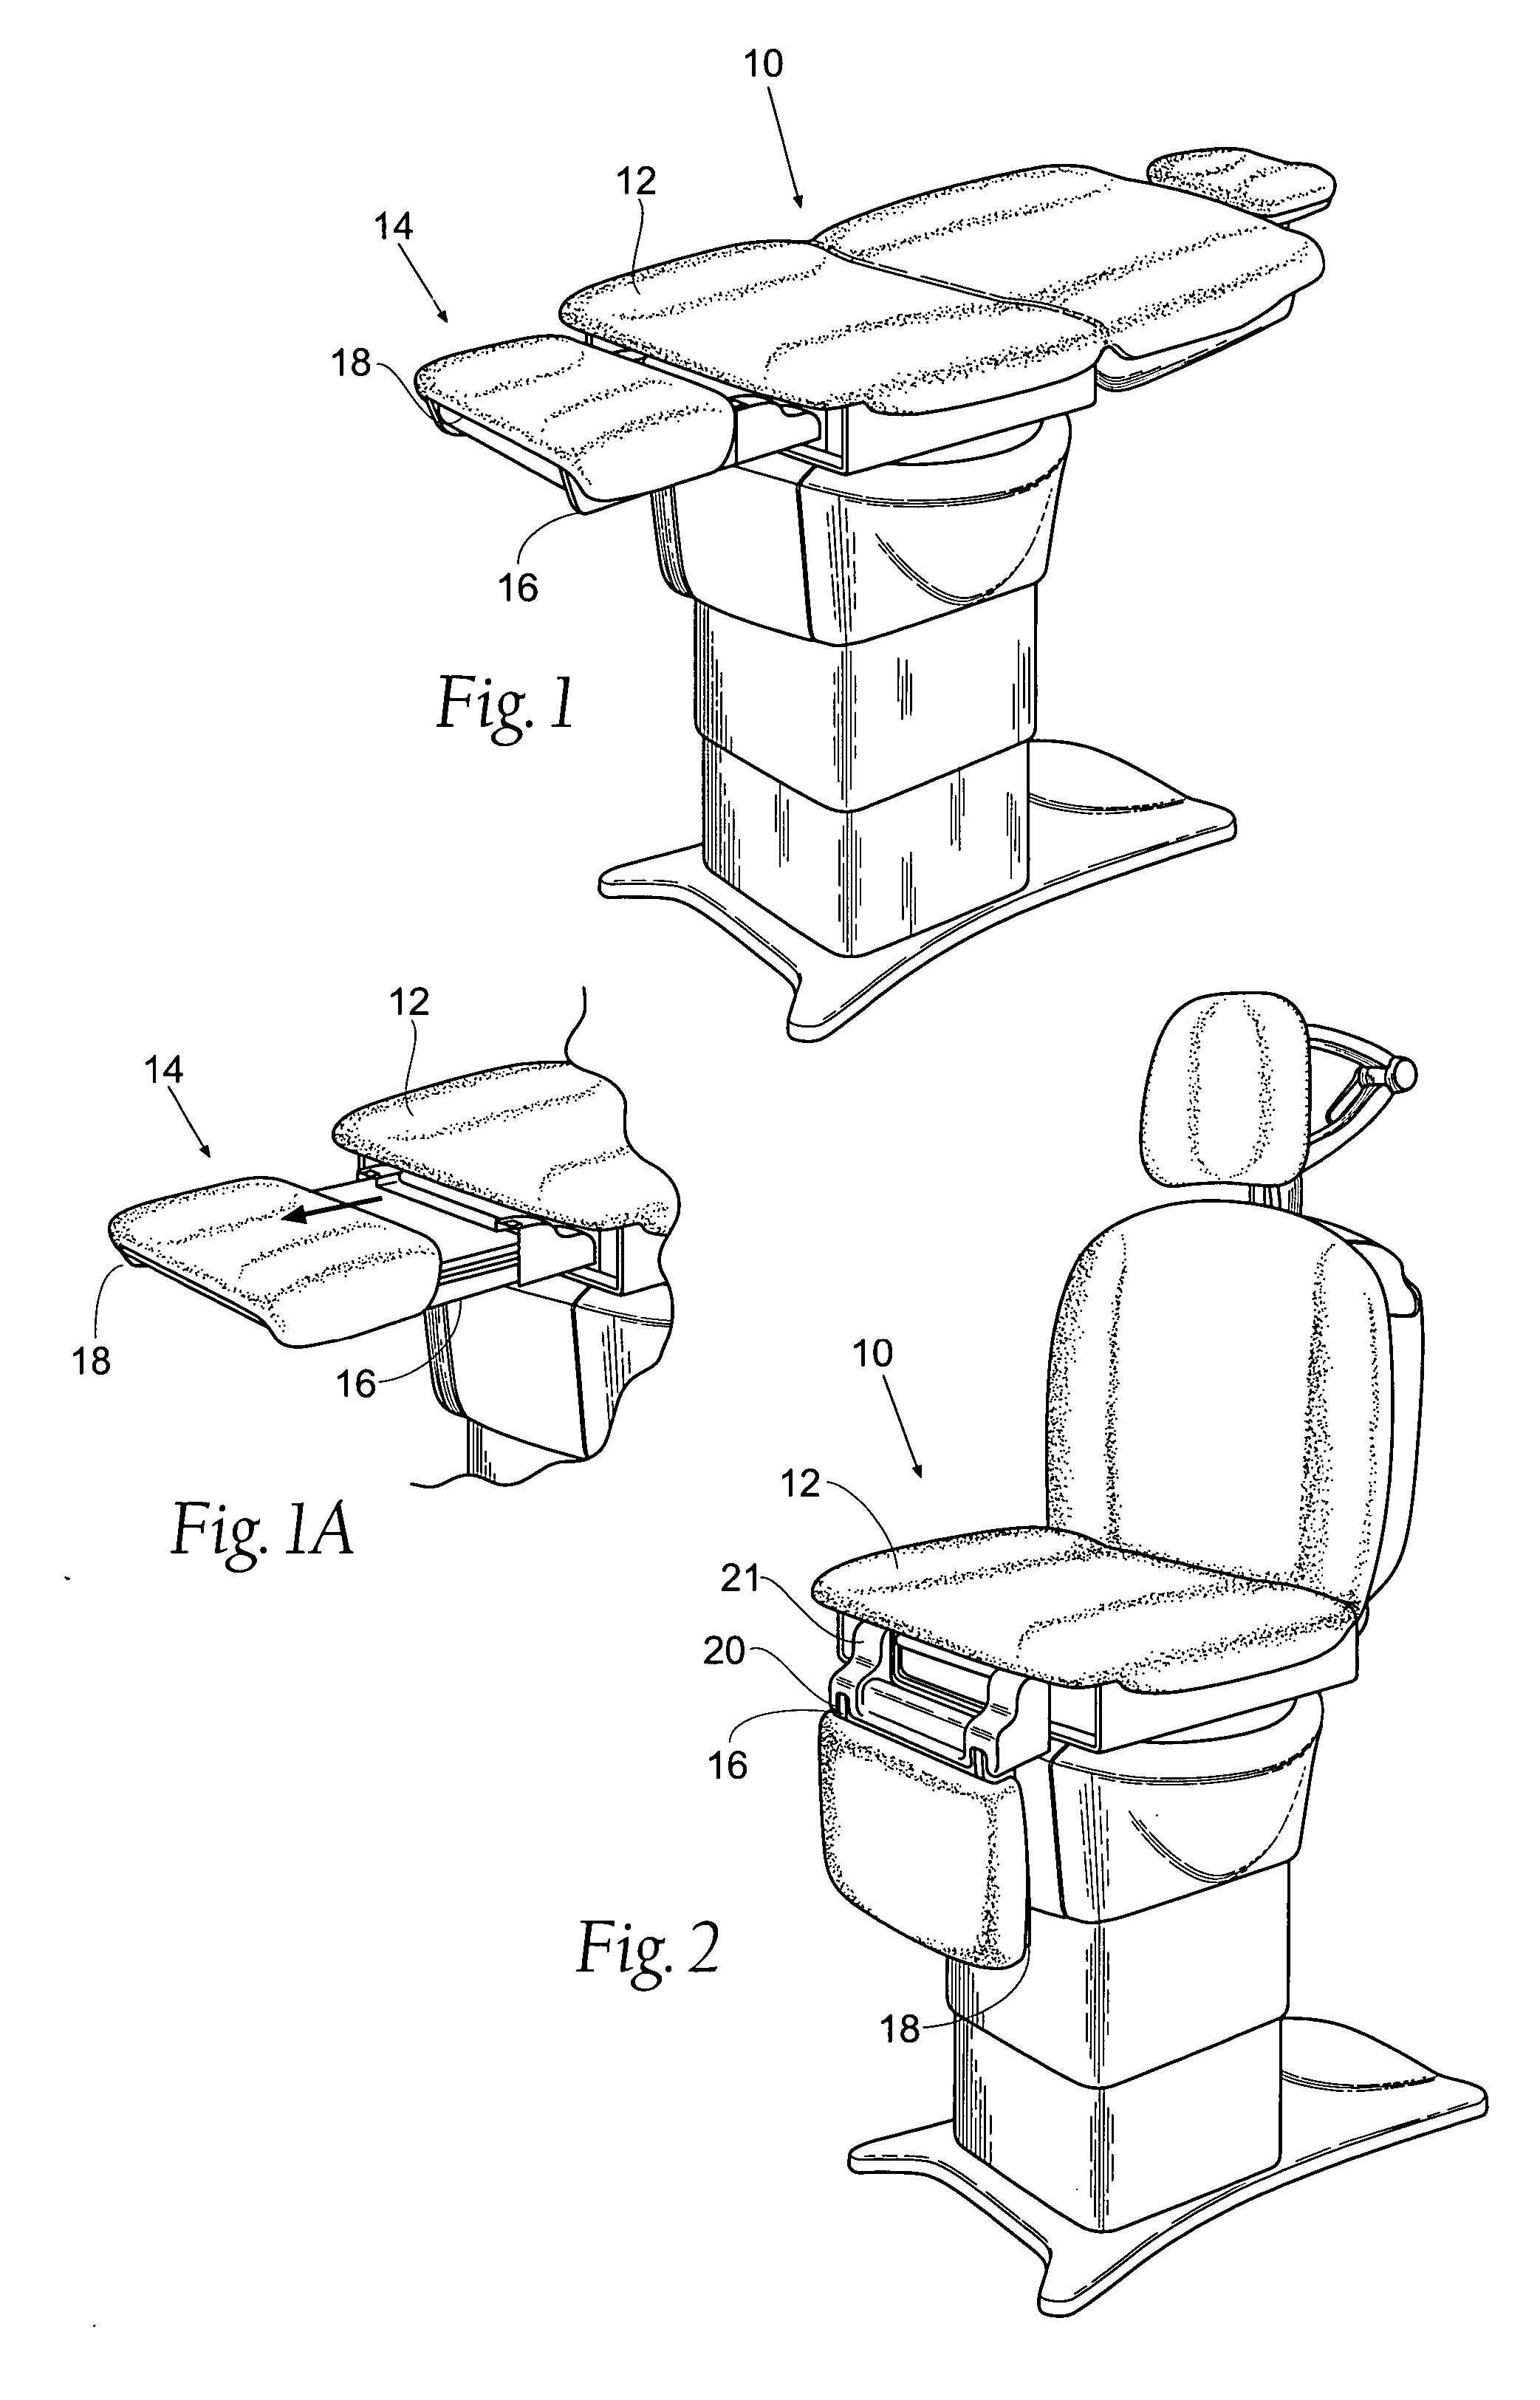 Leg rest and kneeler assembly for a medical examination table